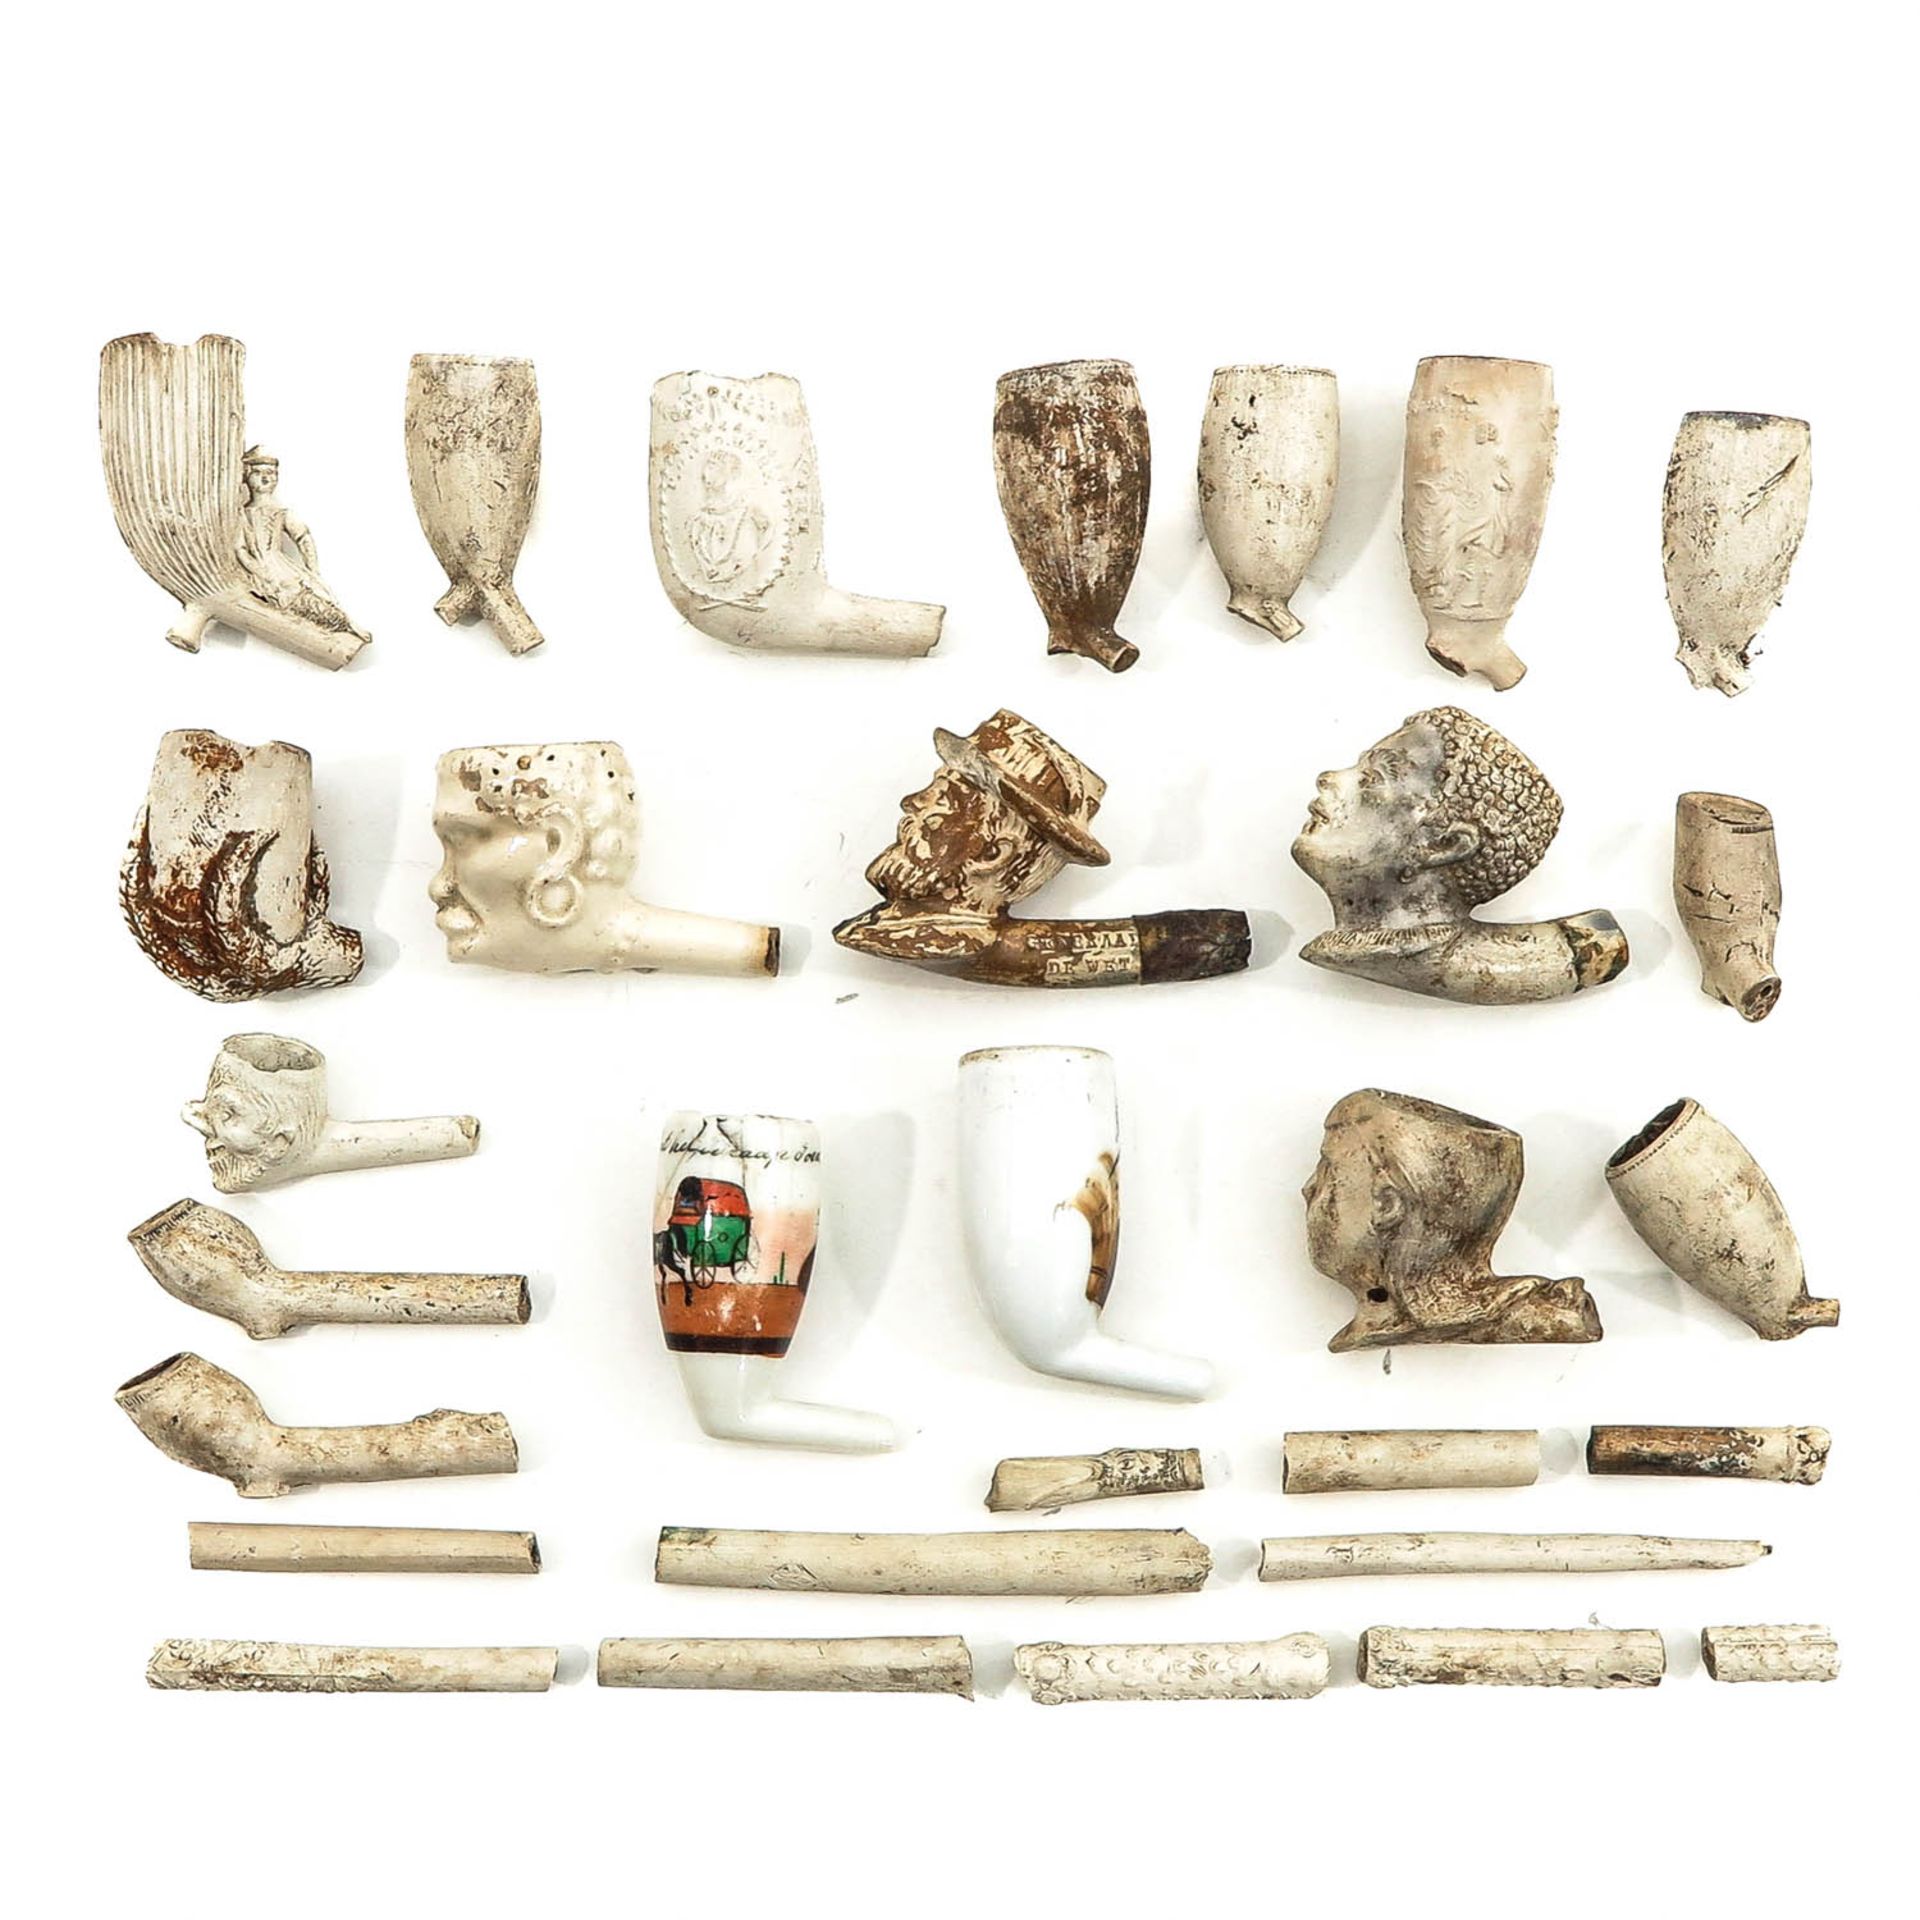 A Collection of Archeological Finds